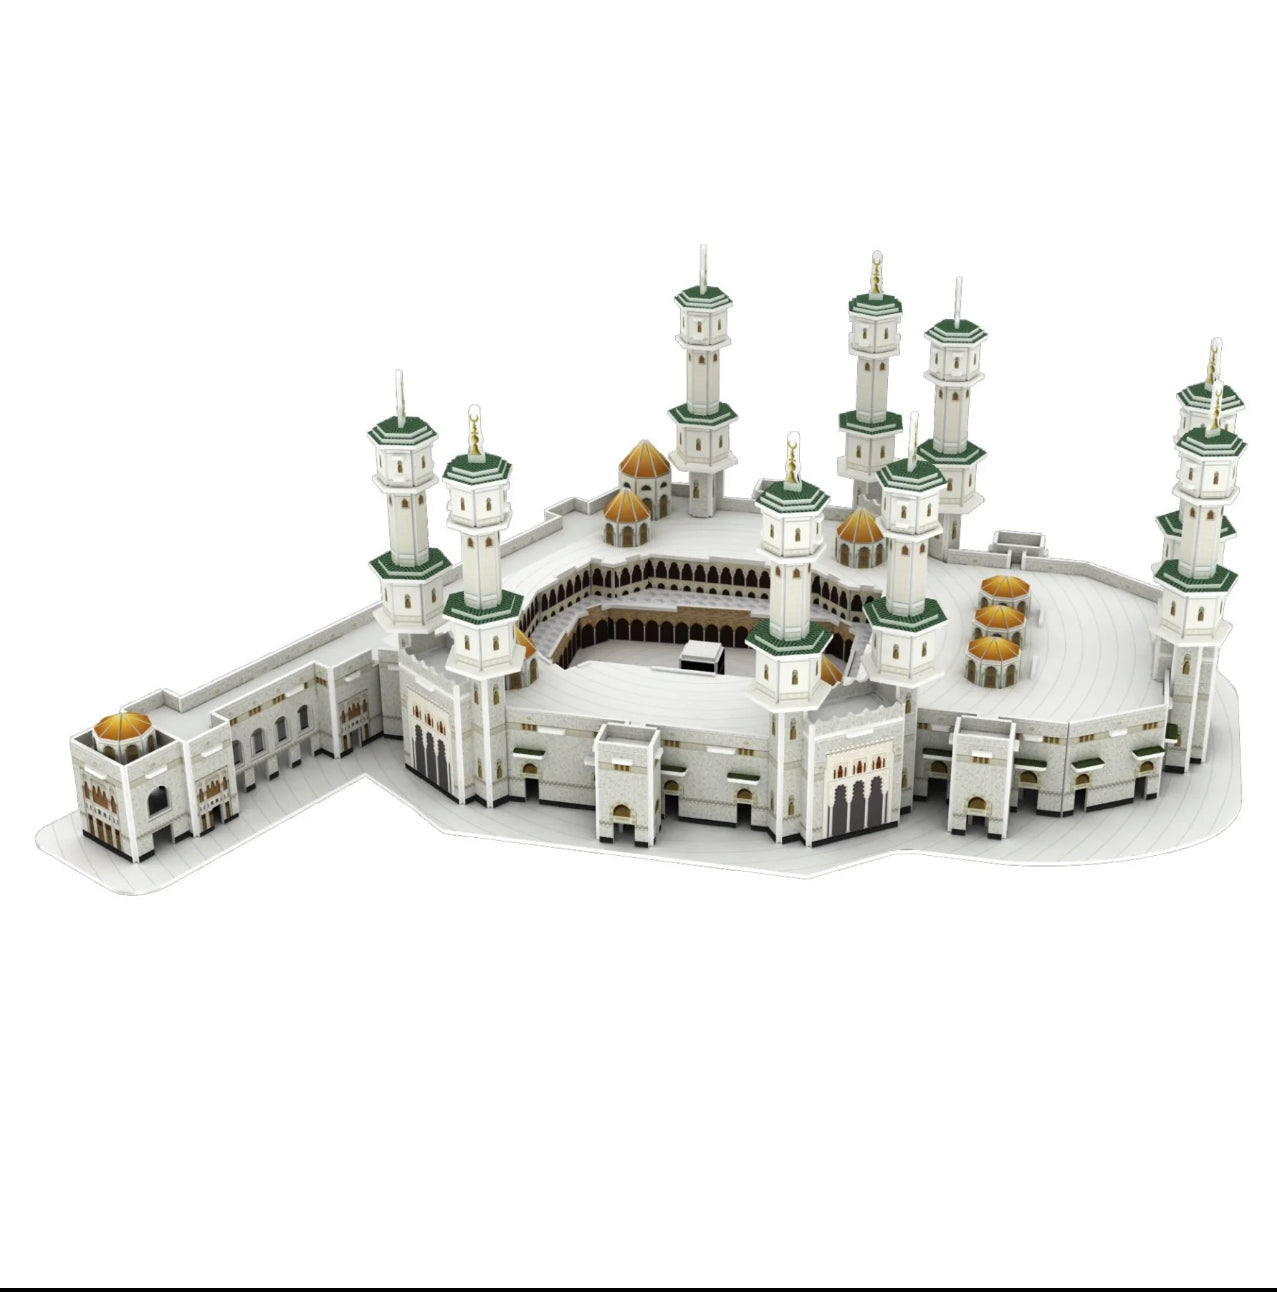 3D Puzzle of Mecca | Educational and Decorative Model for Muslim Families